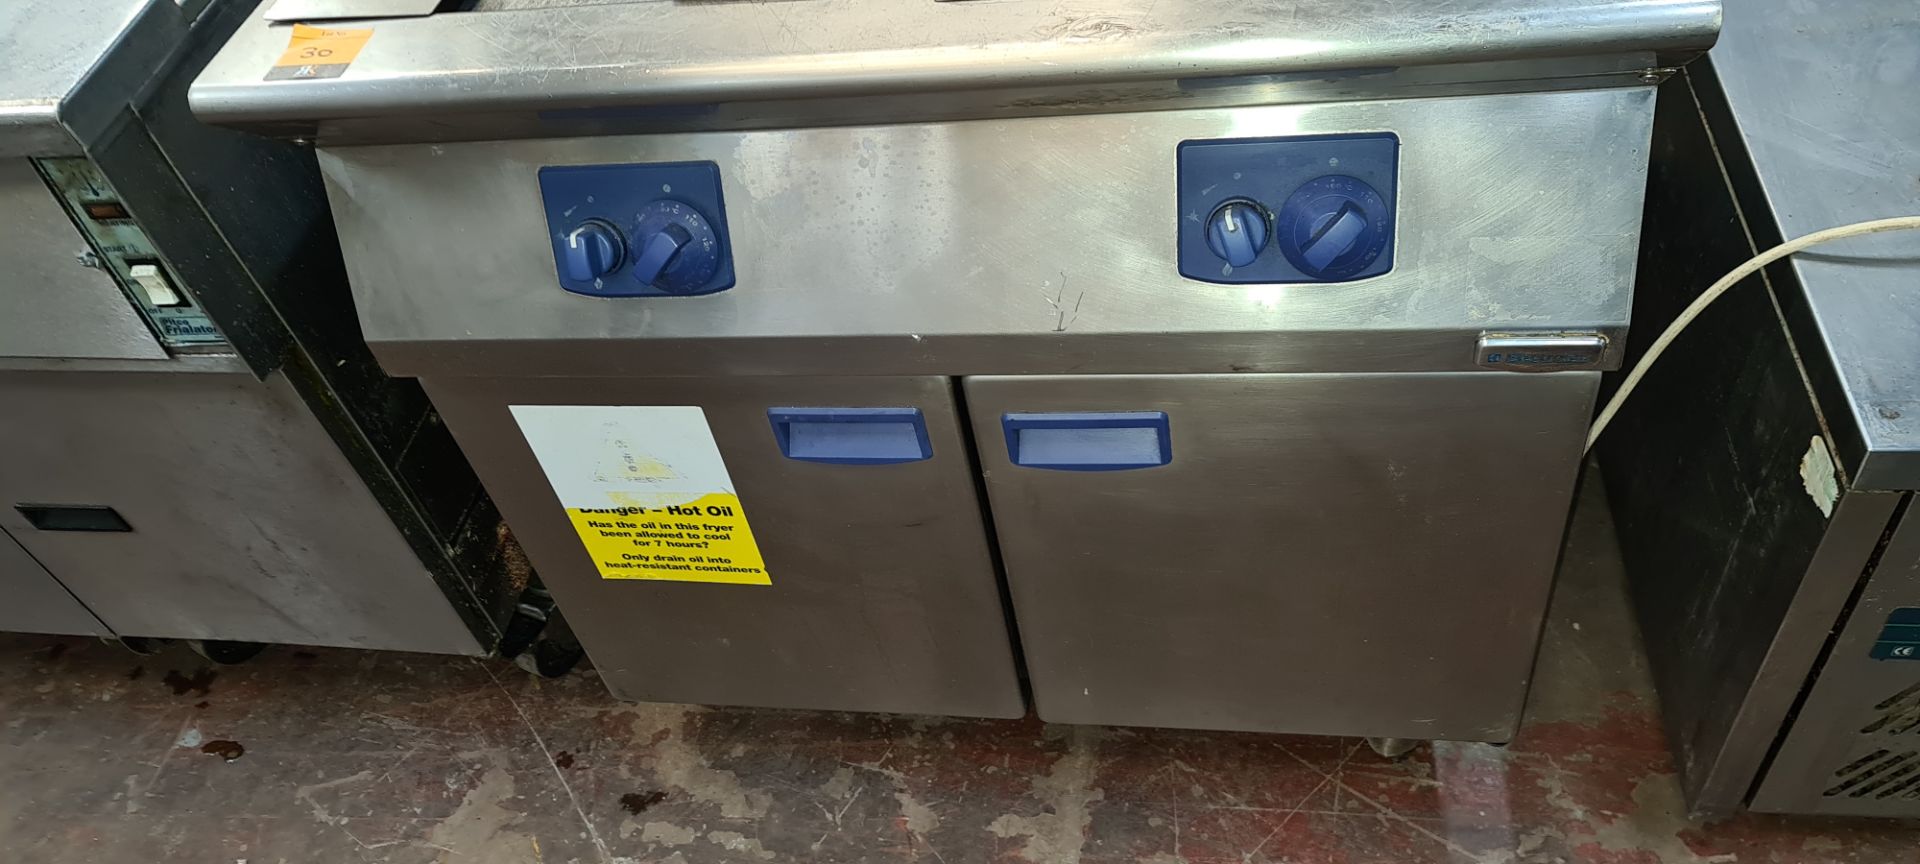 Electrolux stainless steel twin well deep fat fryer system model QFRG800 - Image 3 of 6